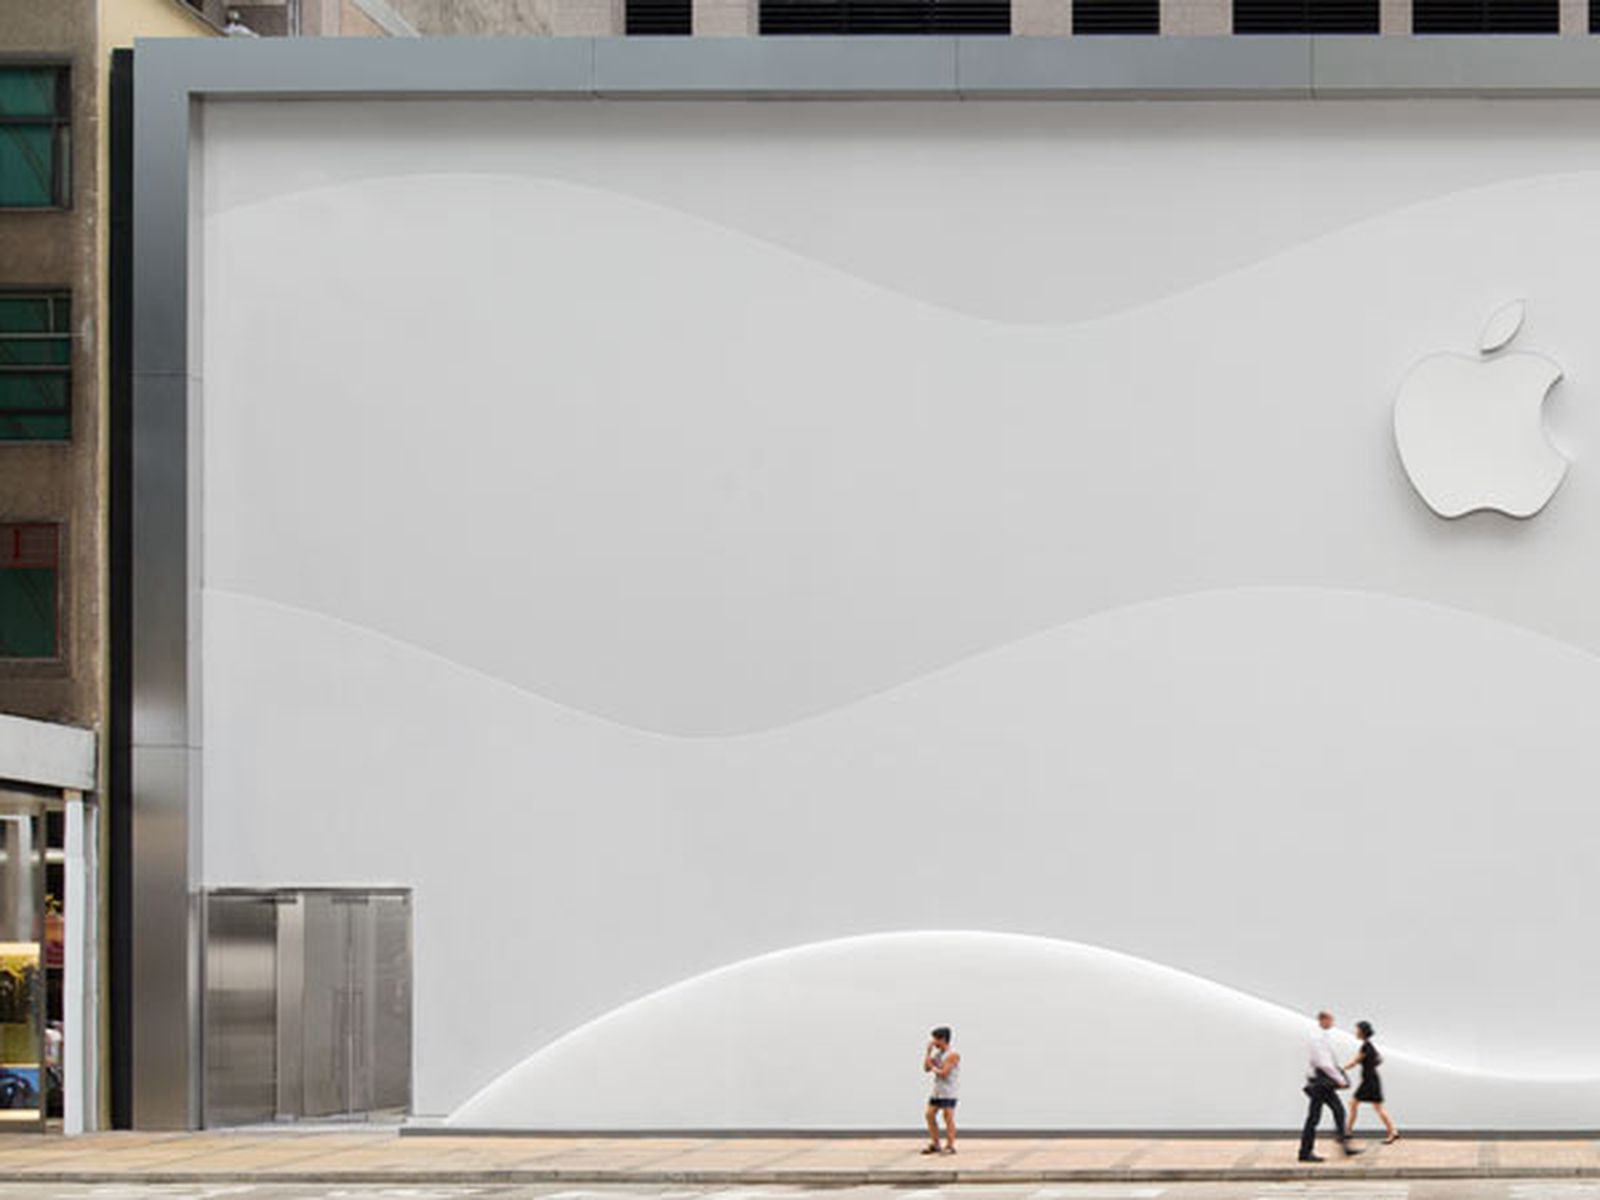 Apple's Fourth Retail Store in Hong Kong Nearing Completion